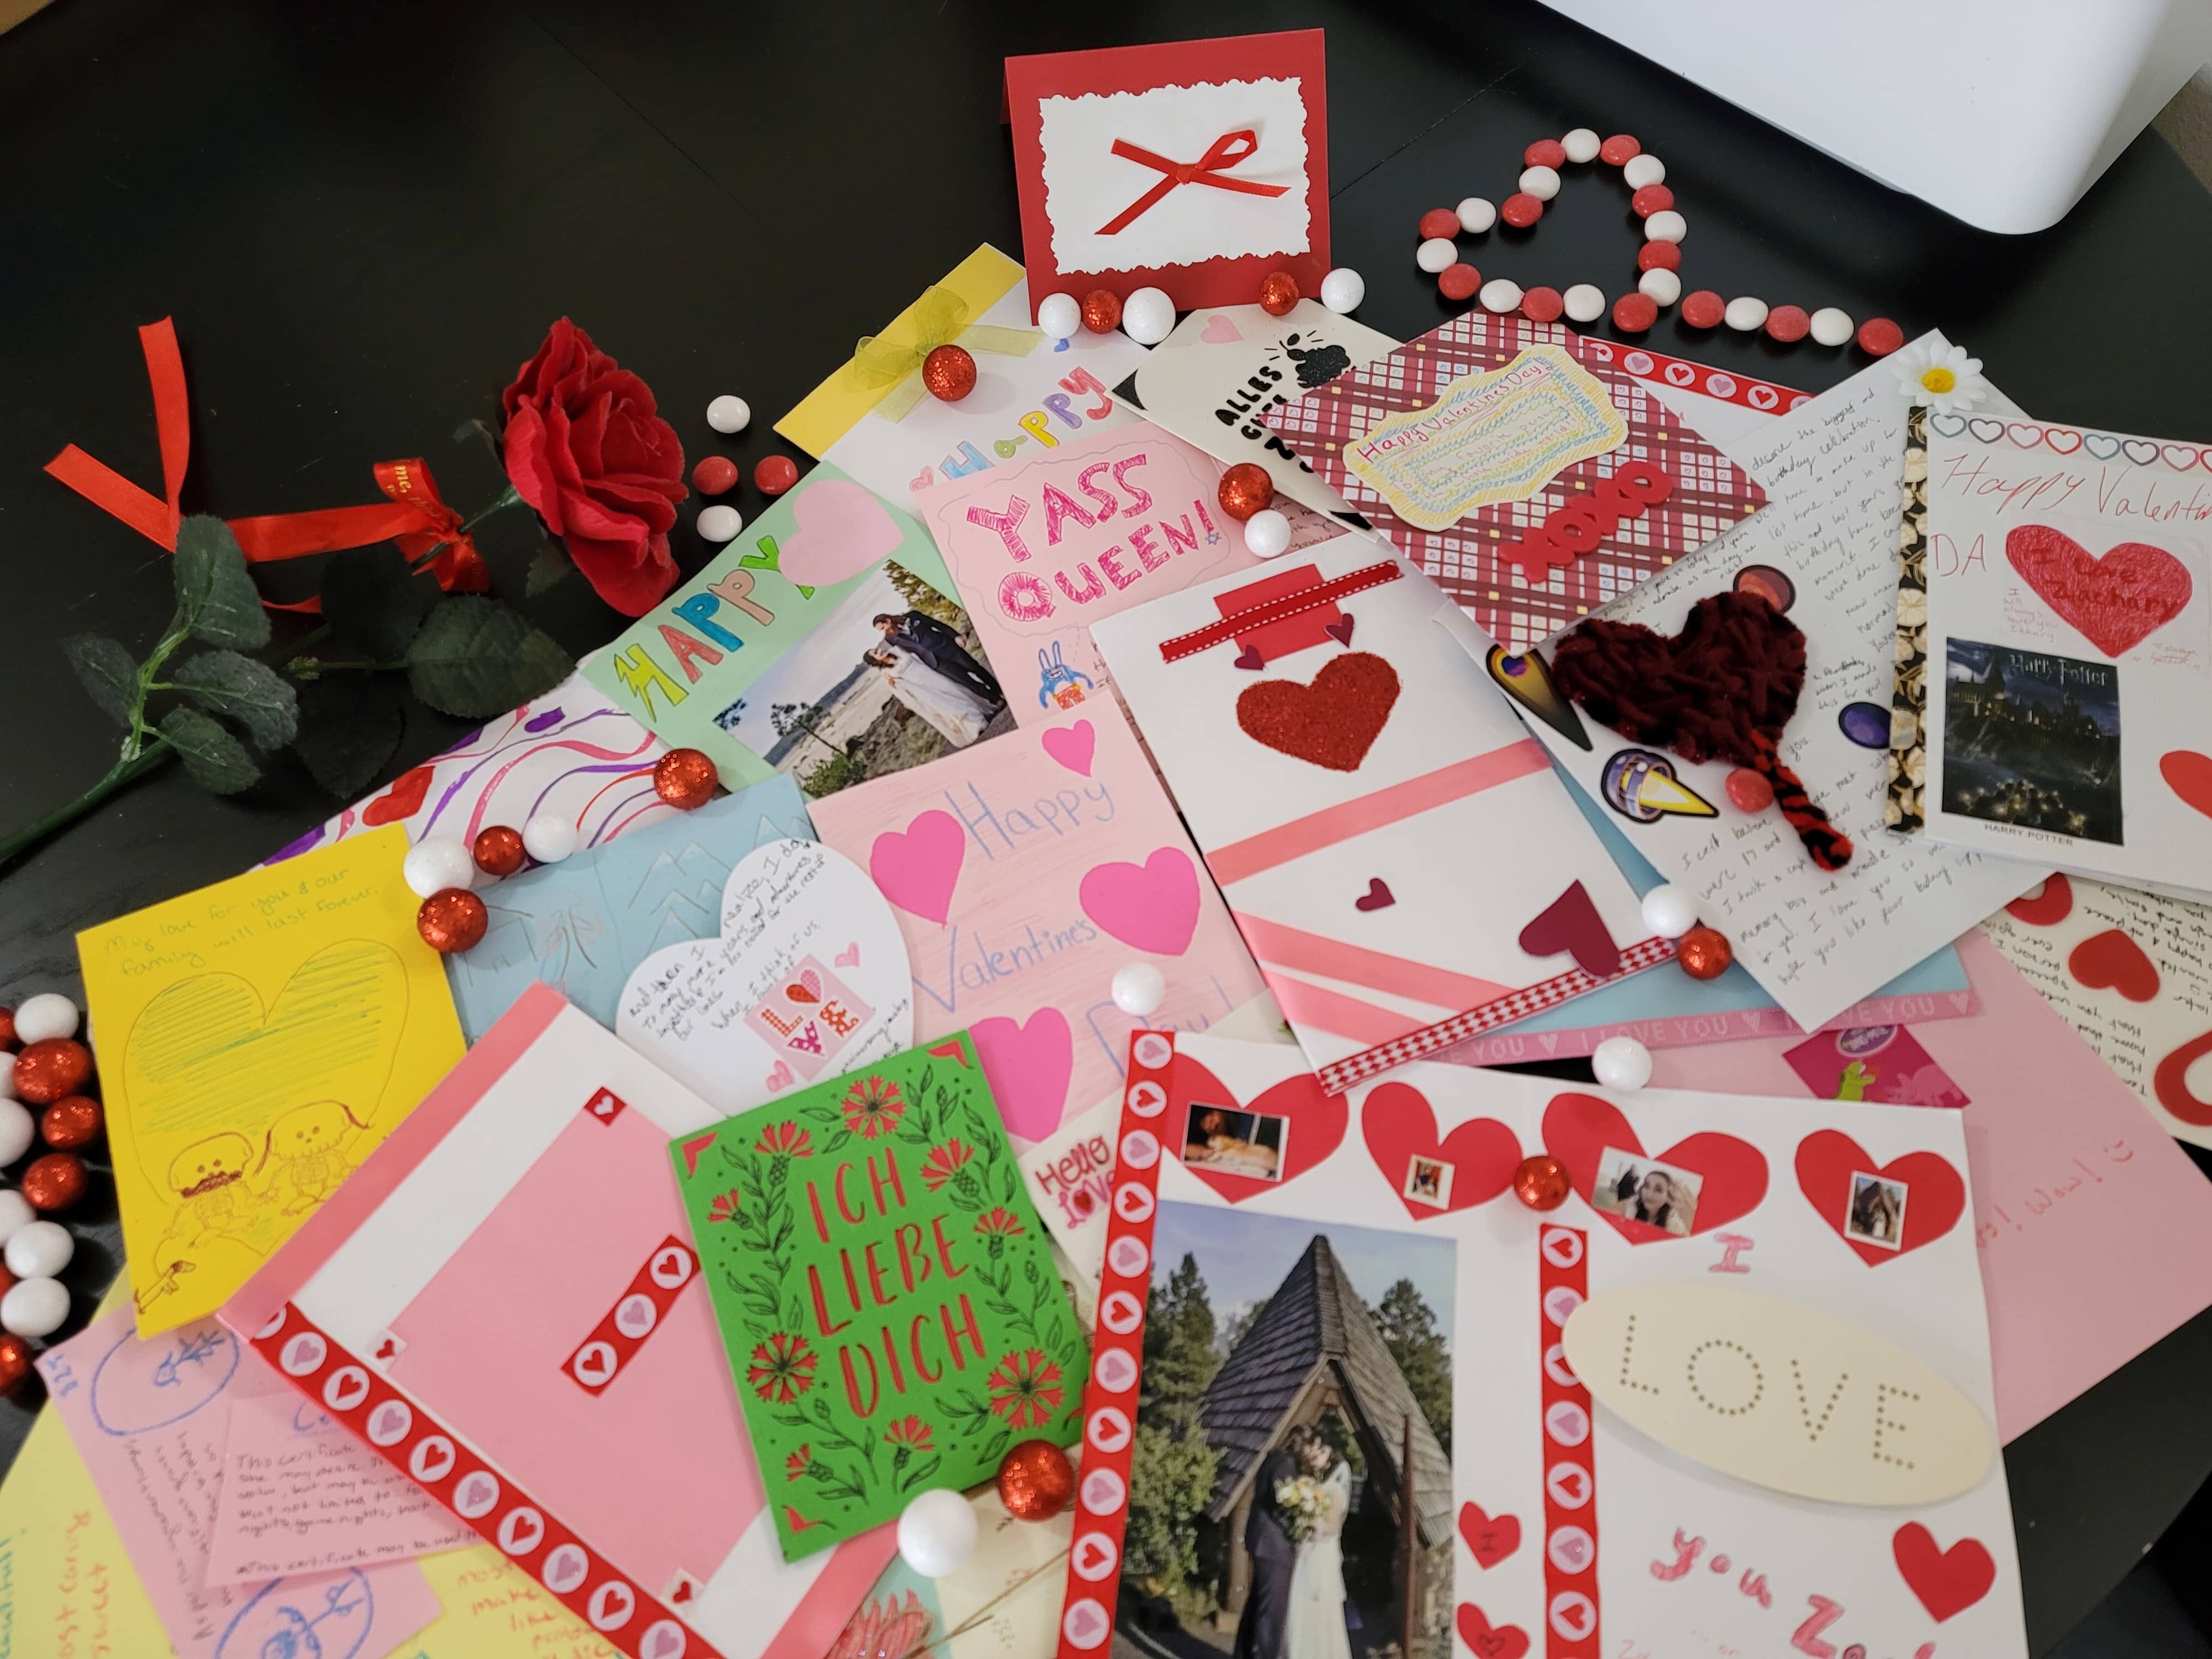 numerous homemade cards strewn about a table with a rose off to the side and red and white candies strewn about and in the shape of a heart.